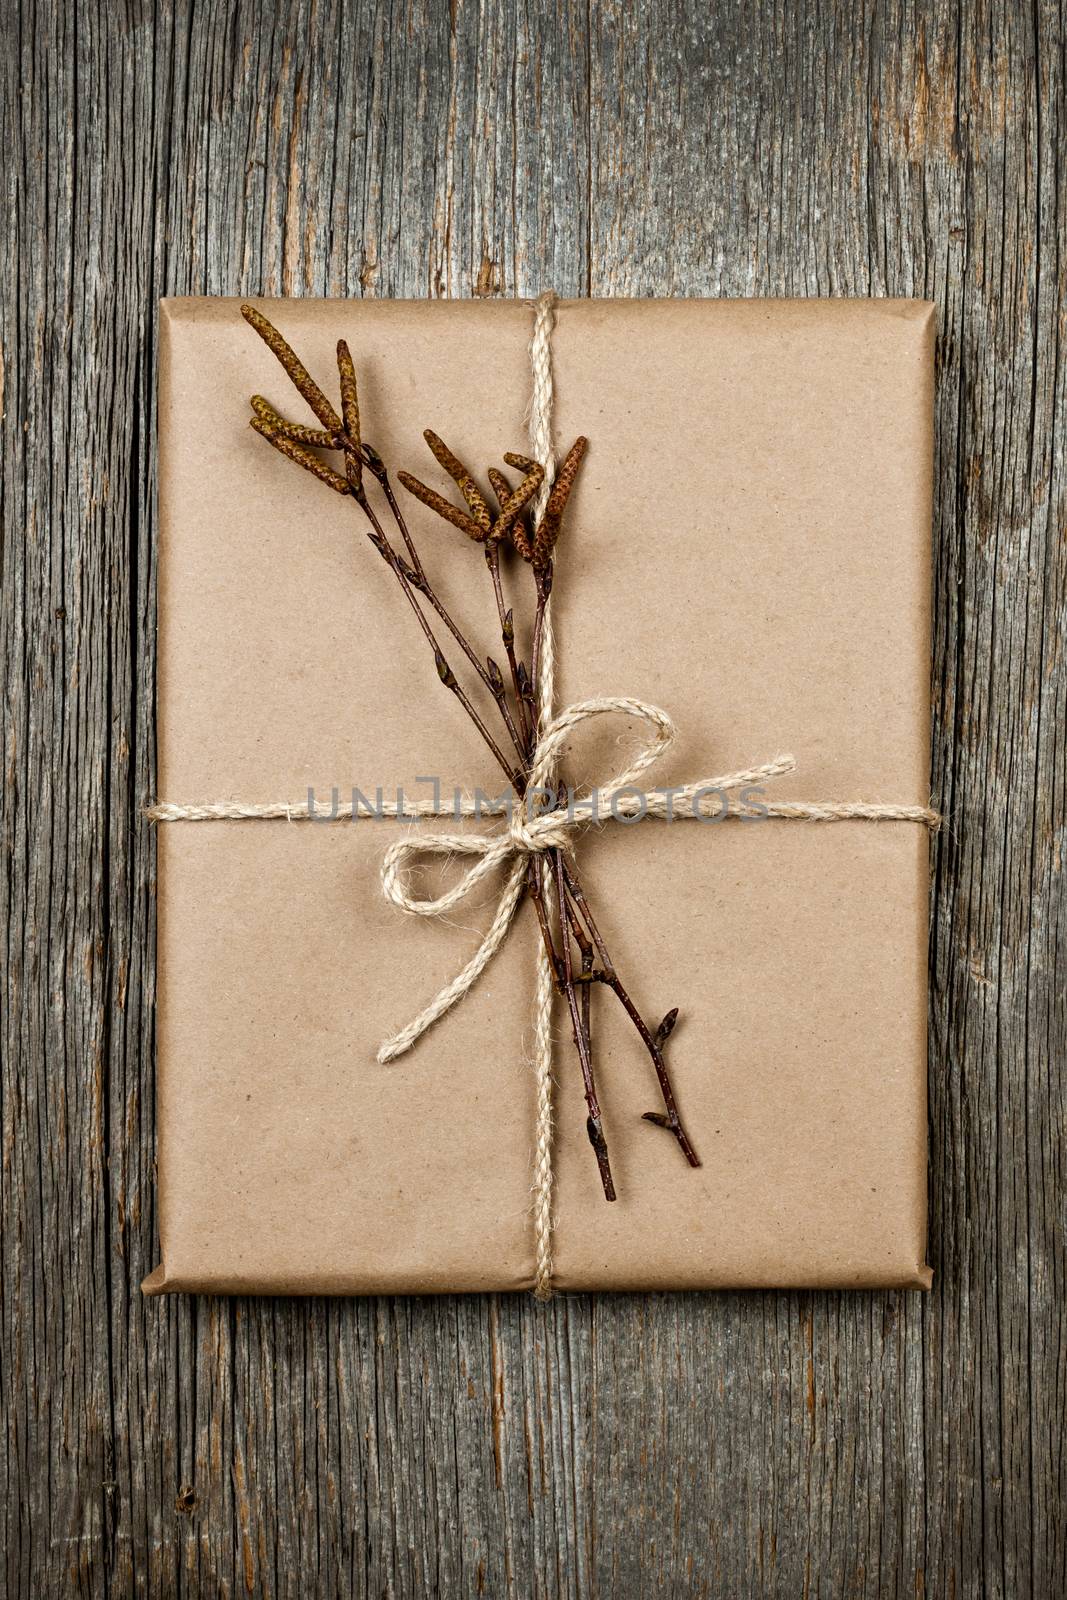 Simple gift package in brown paper decorated with birth branches on rustic wood background